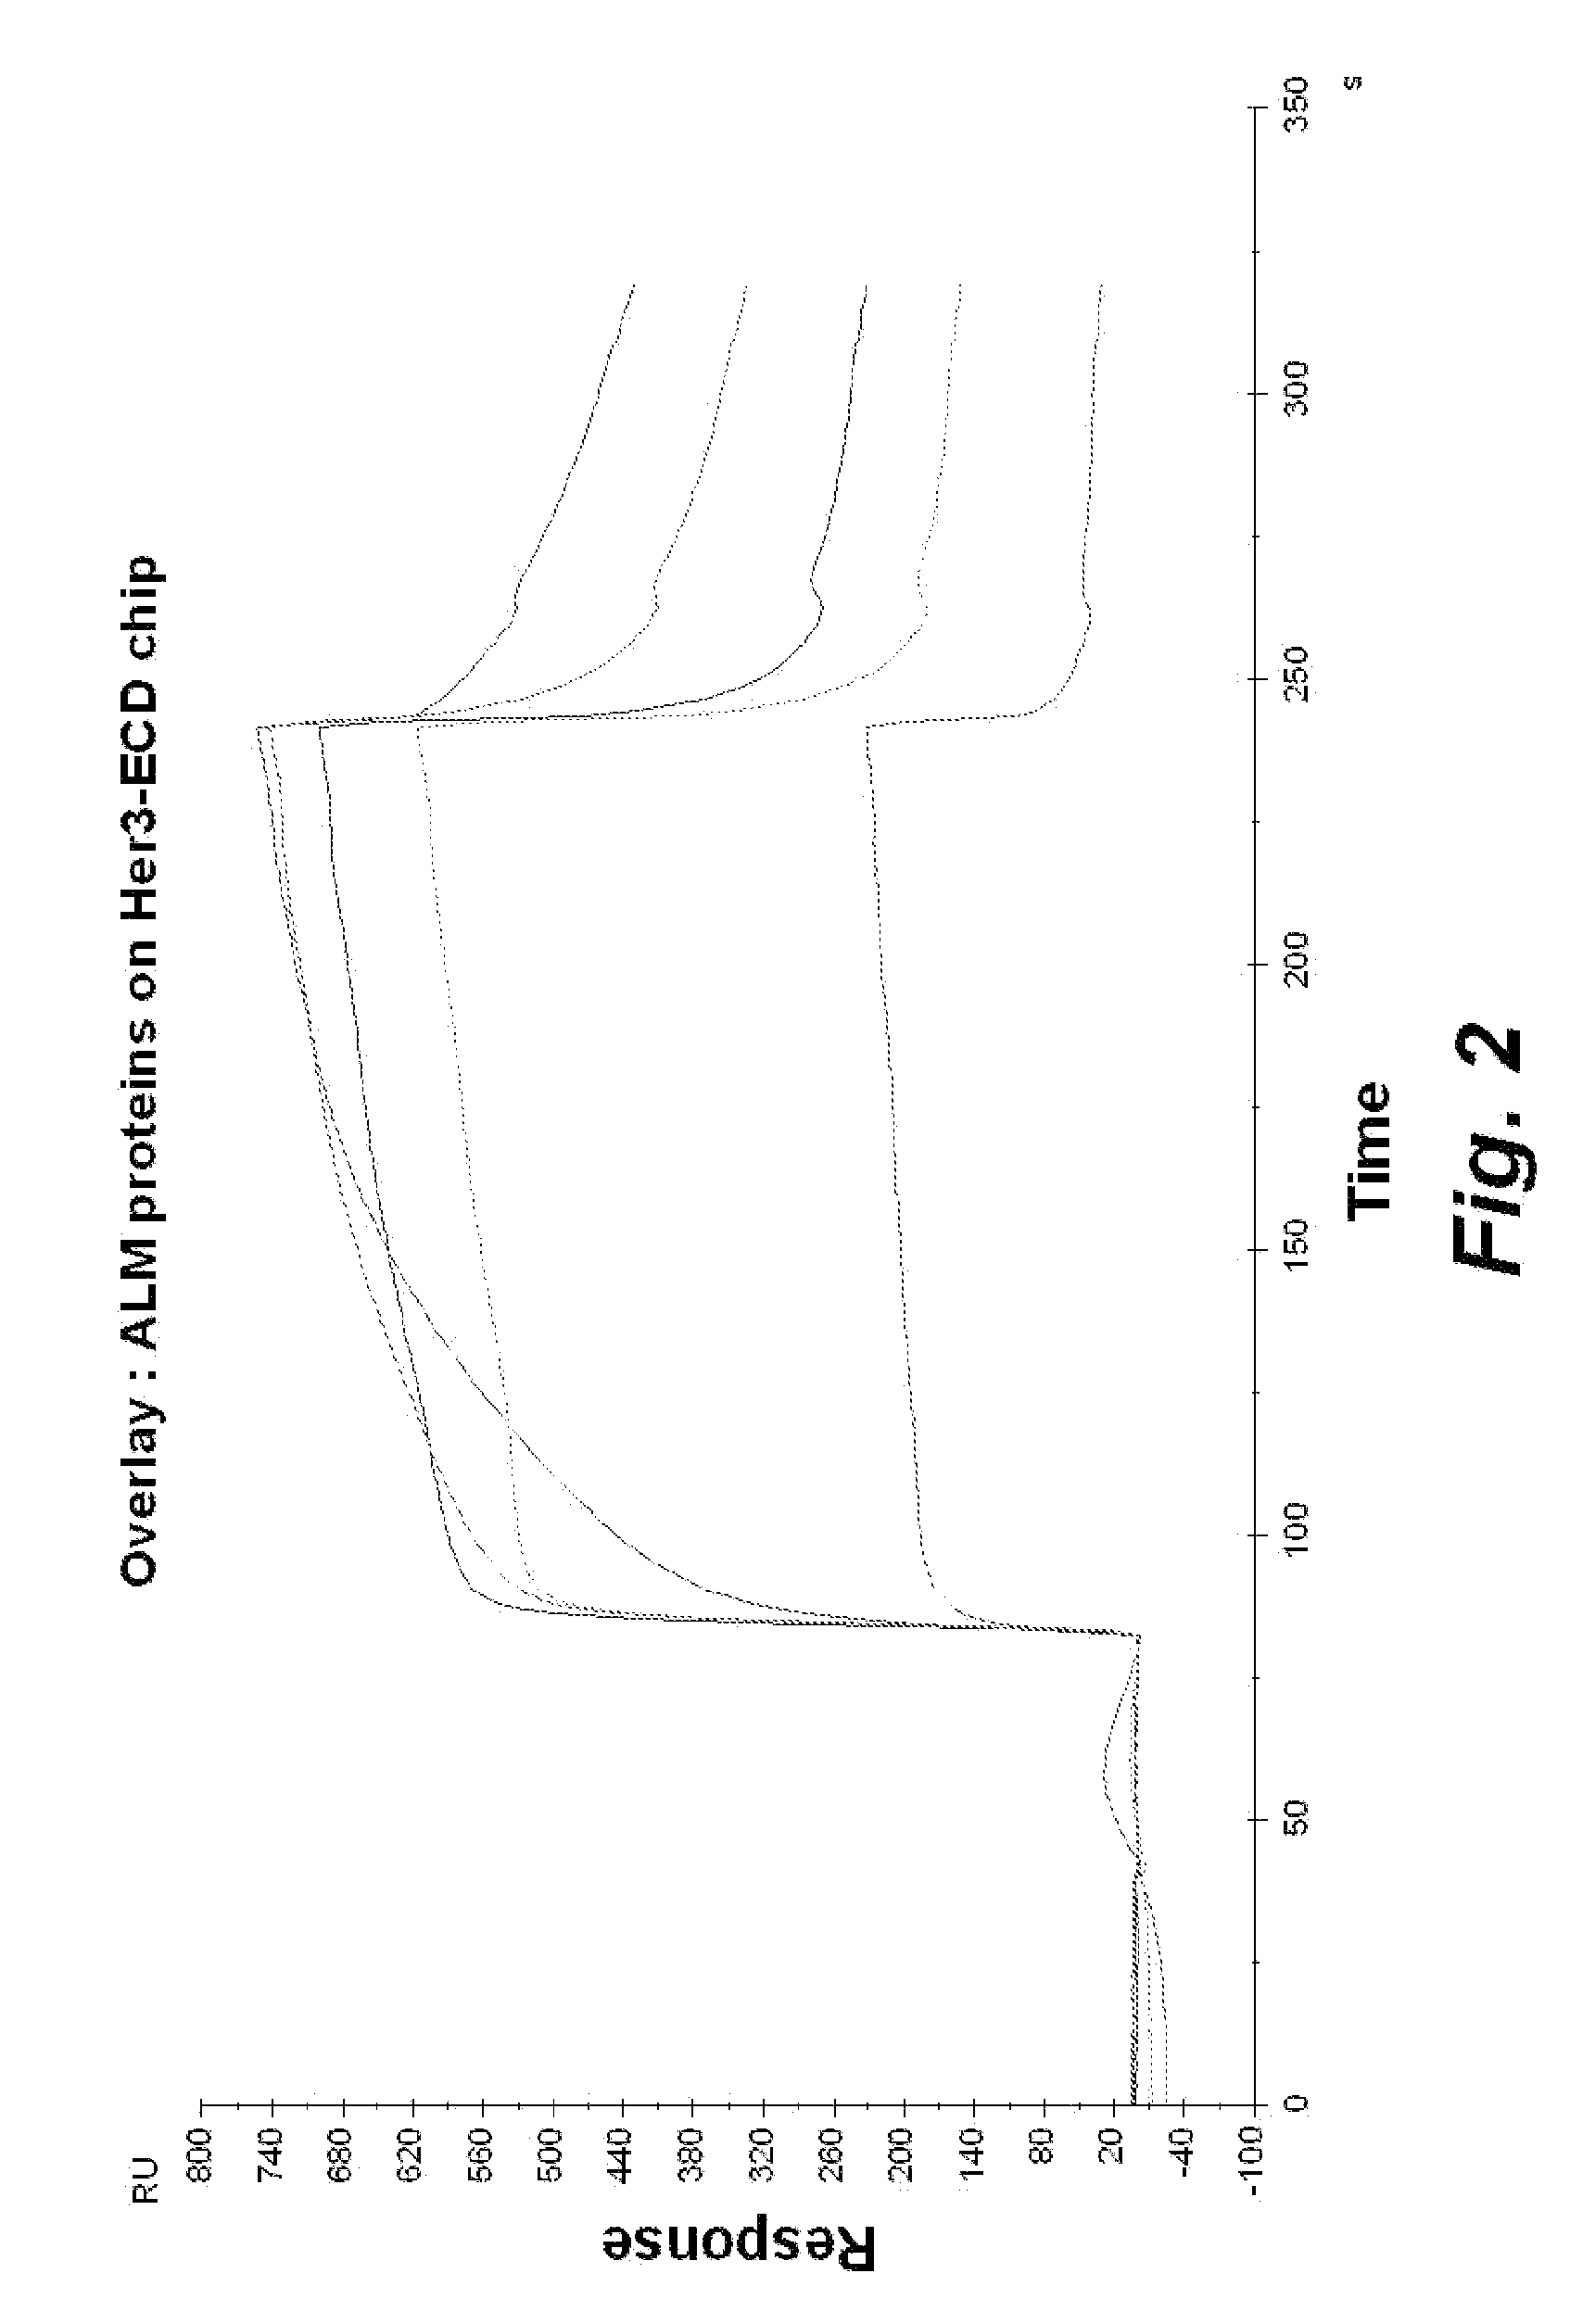 BISPECIFIC SINGLE CHAIN Fv ANTIBODY MOLECULES AND METHODS OF USE THEREOF